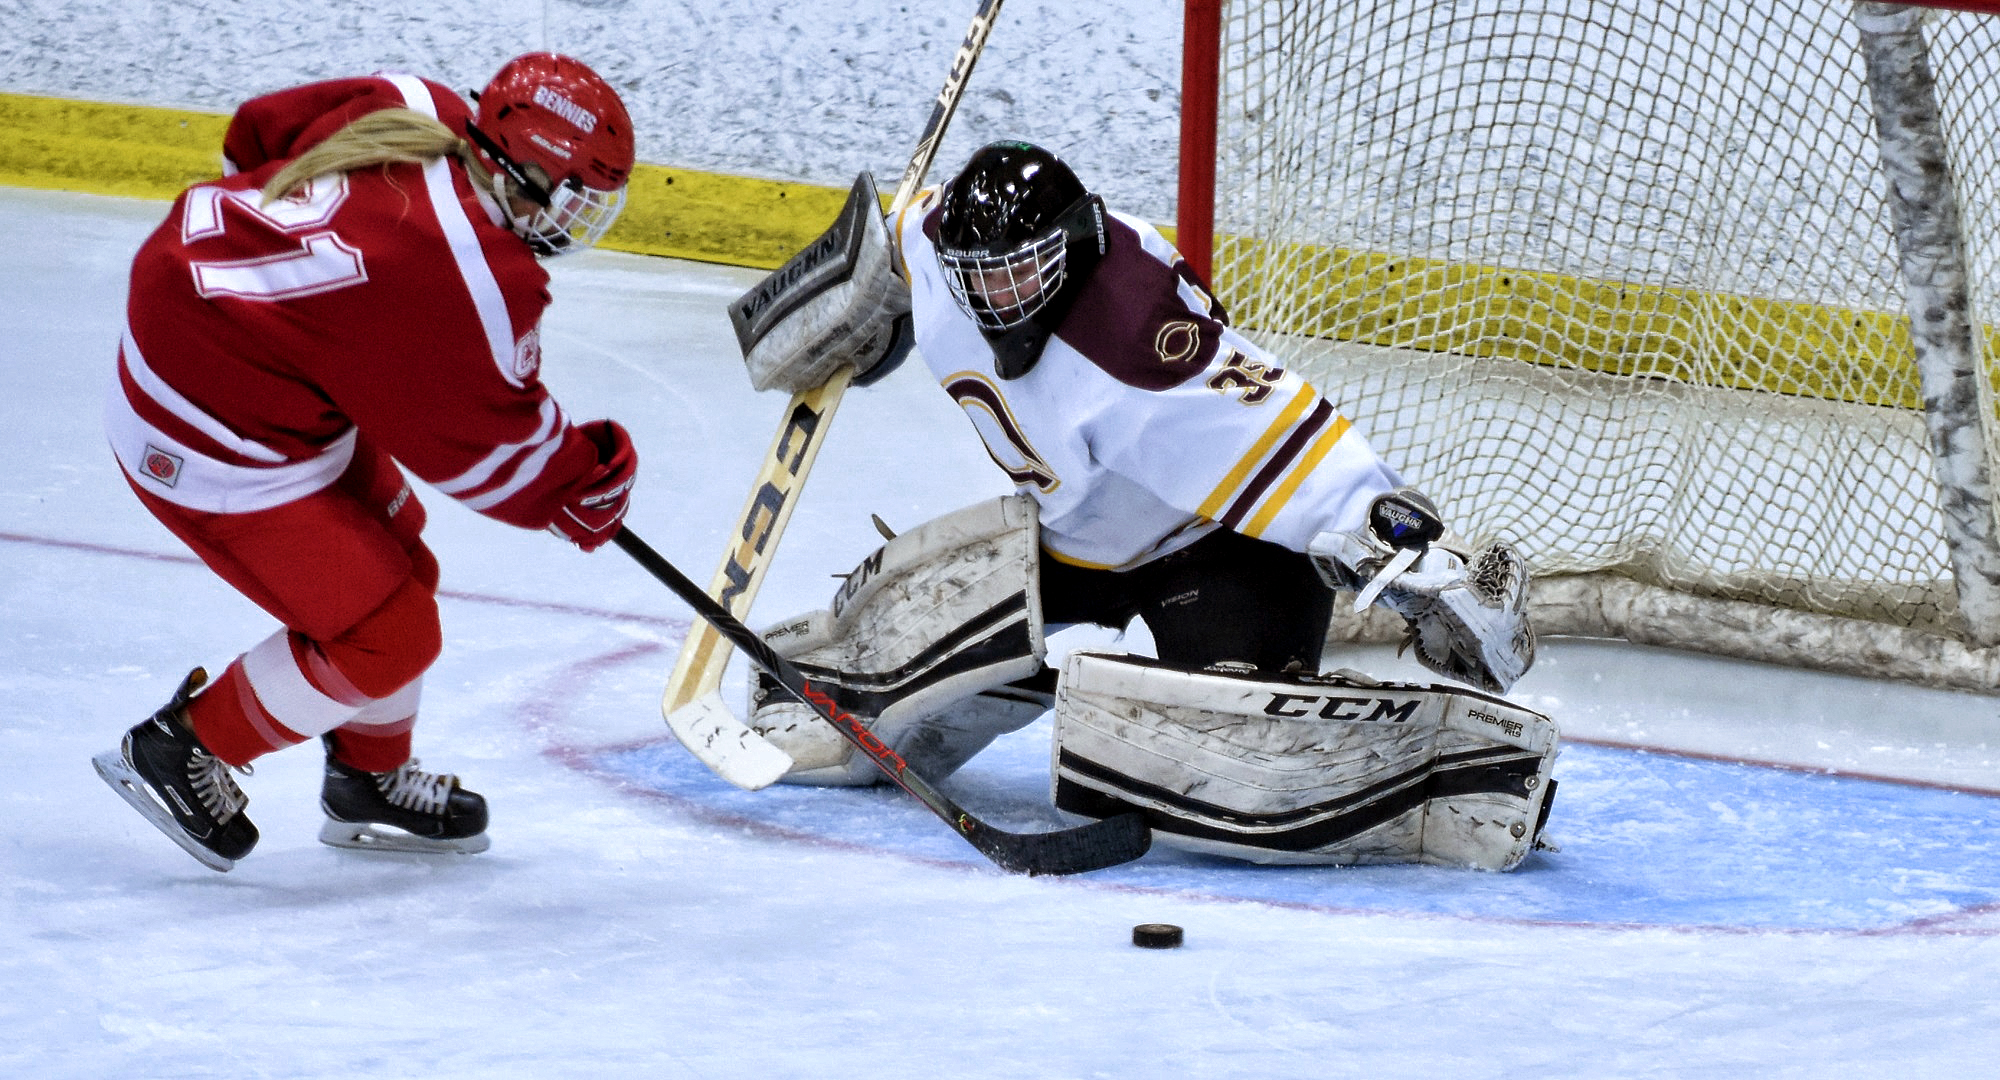 Senior goalie Amy Jost makes the save on a penalty shot in the third period of the Cobbers' series opener with St. Benedict.